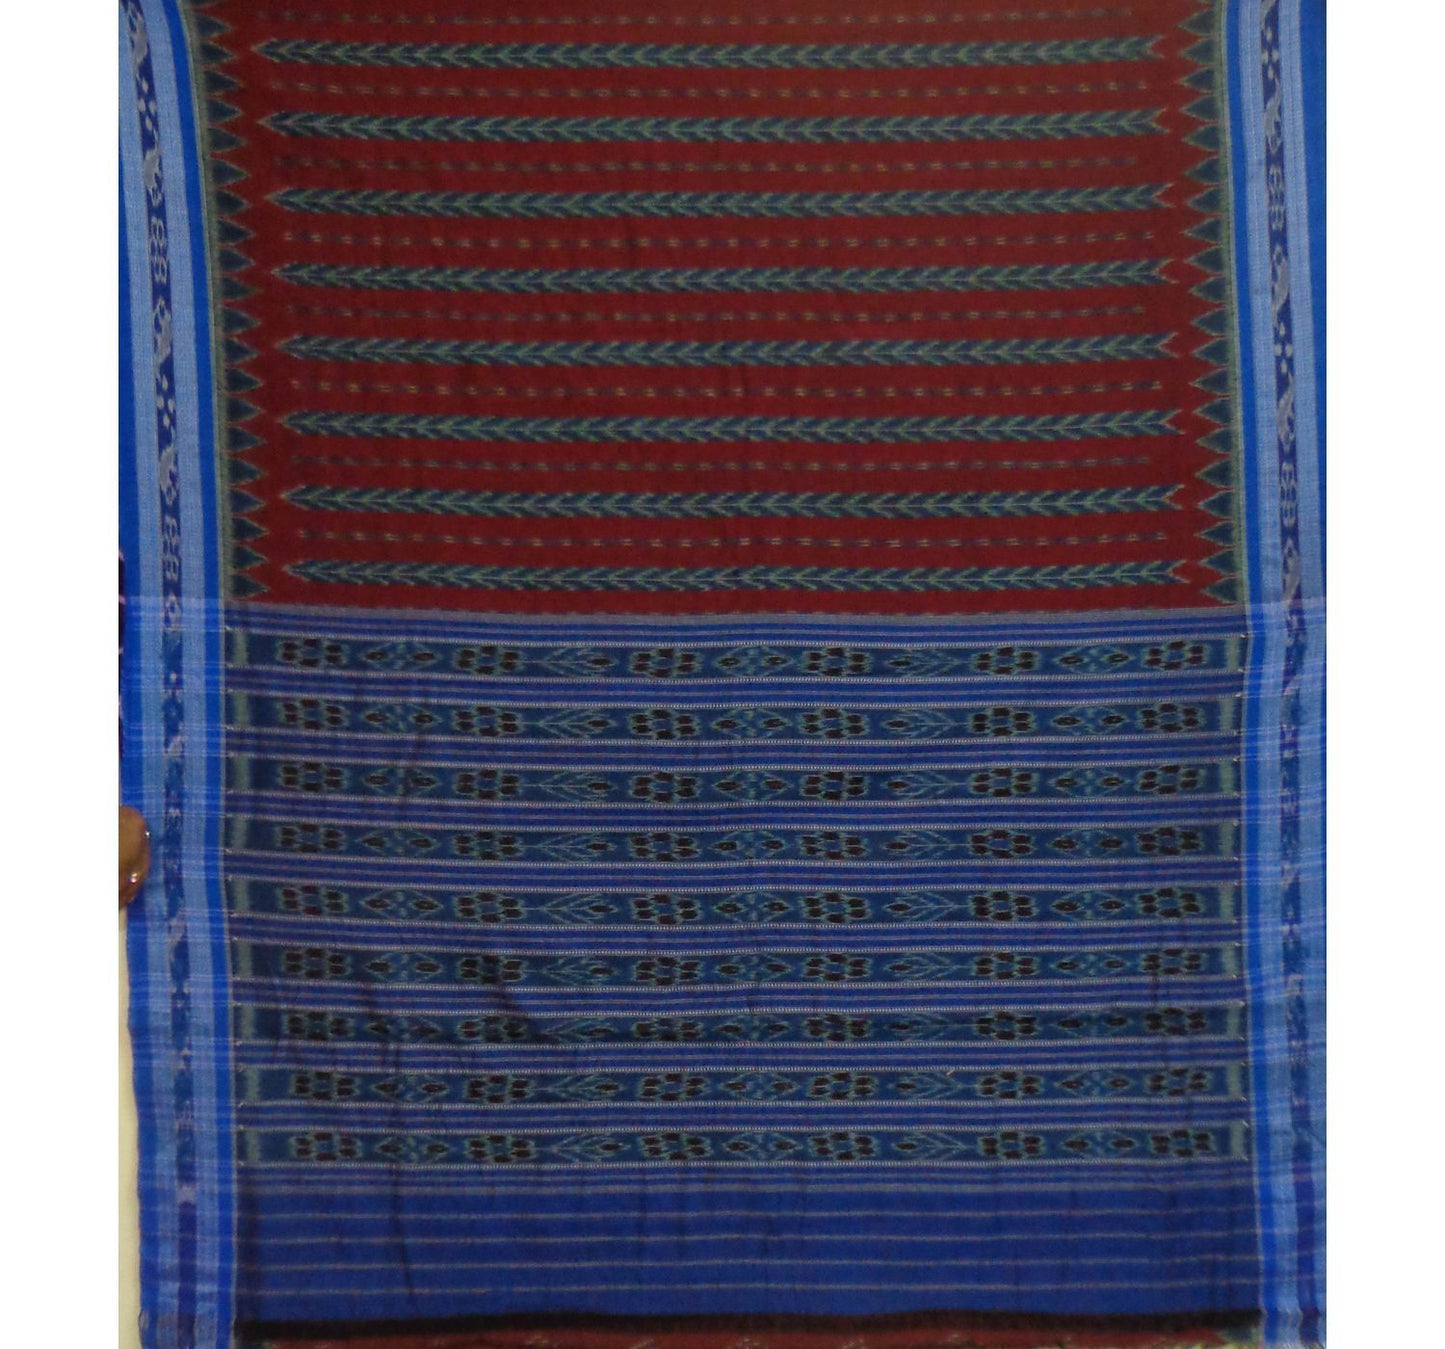 Maroon with Blue Handwoven Cotton Saree